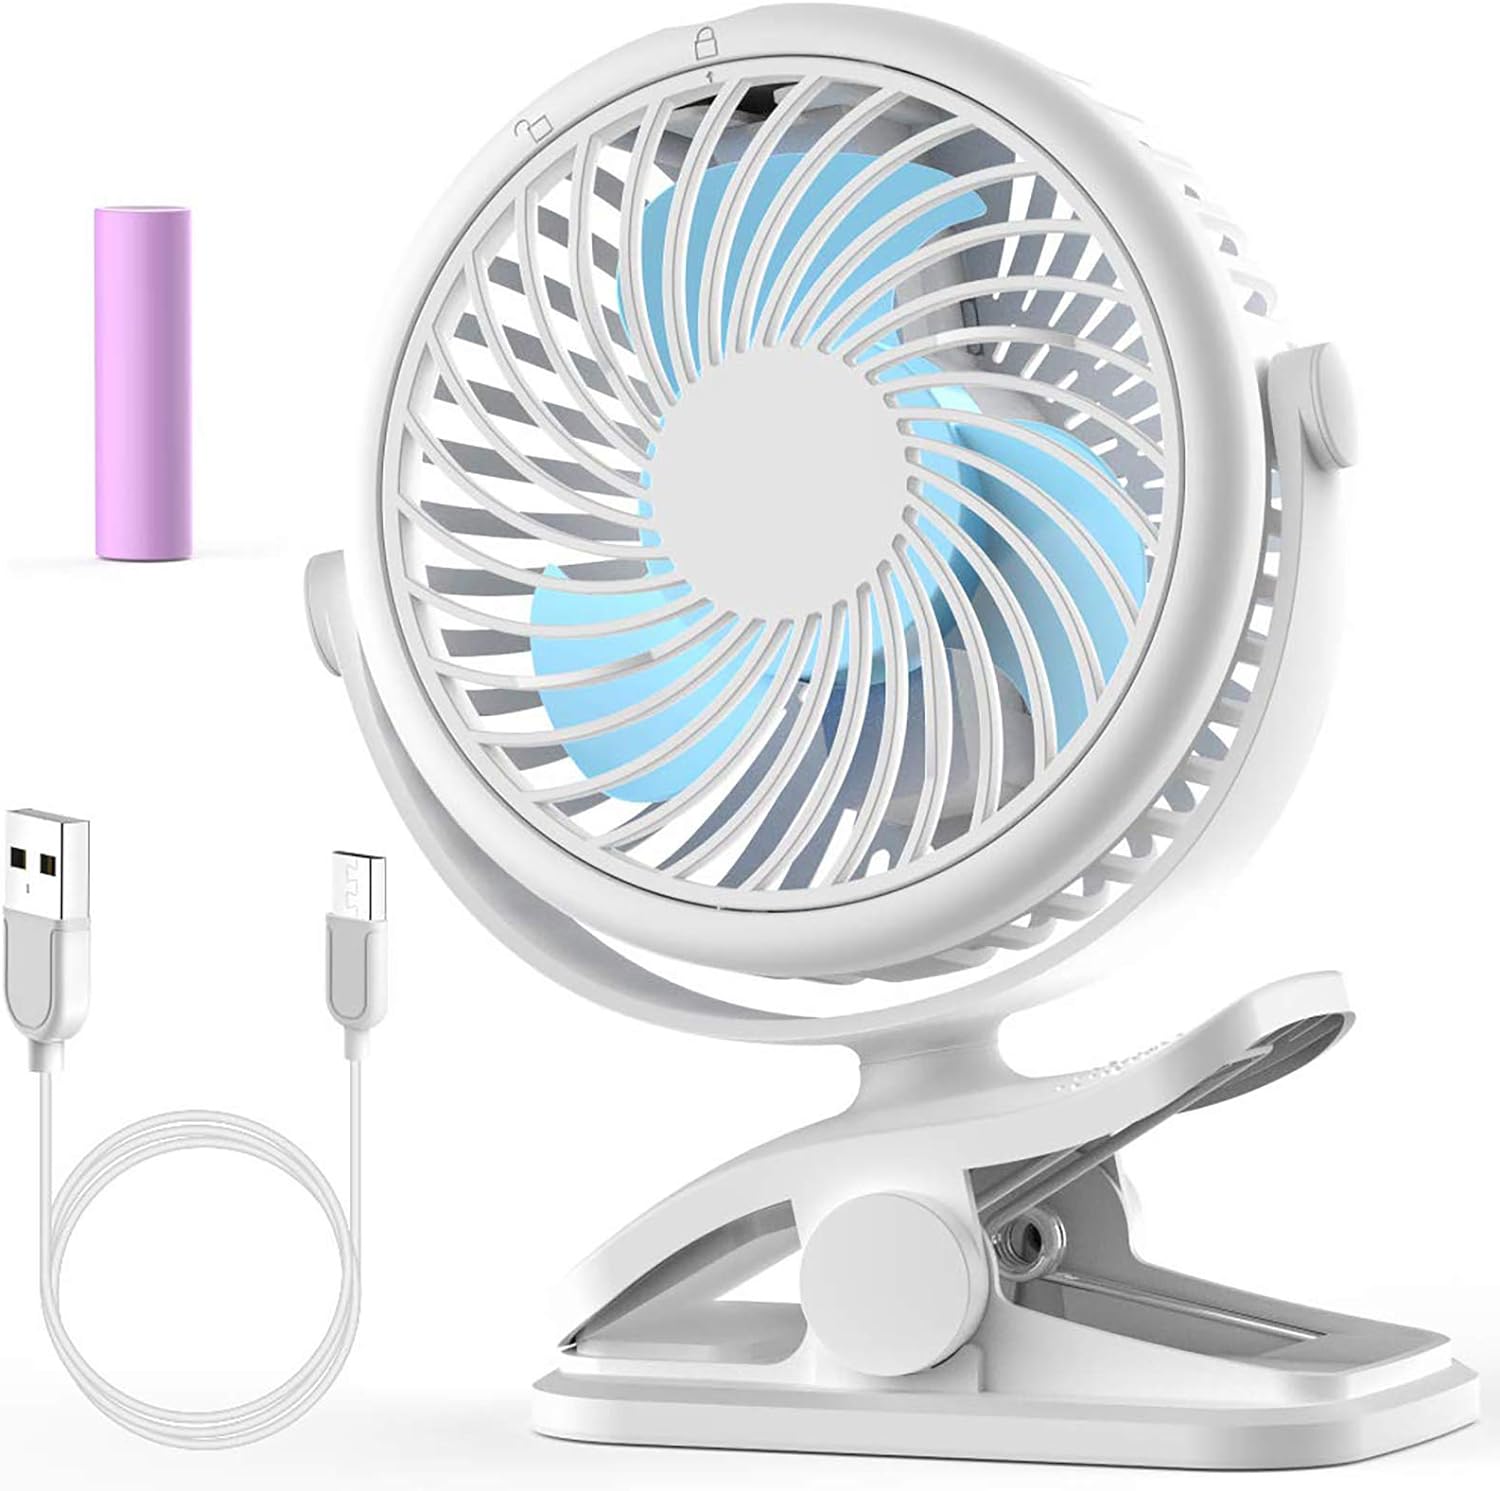 Cambond Baby Stroller Fan Clip - On Desk Fan Rechargeable Battery Powered Baby Fan Portable Small Fan for Baby Carseat Travel Camping, White